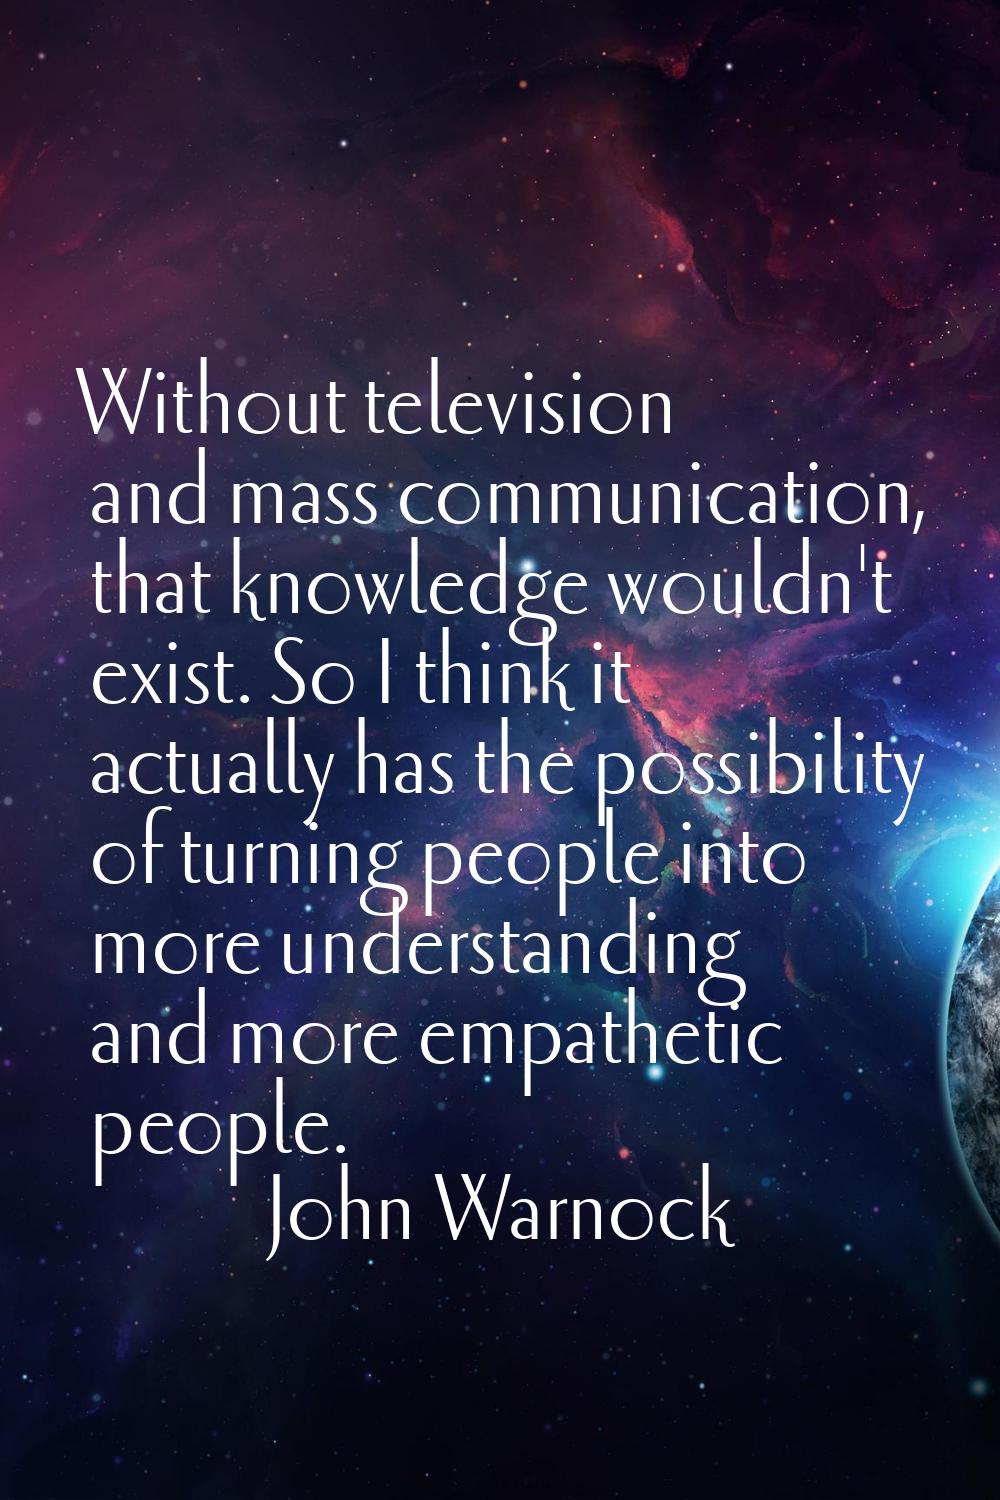 Without television and mass communication, that knowledge wouldn't exist. So I think it actually ha